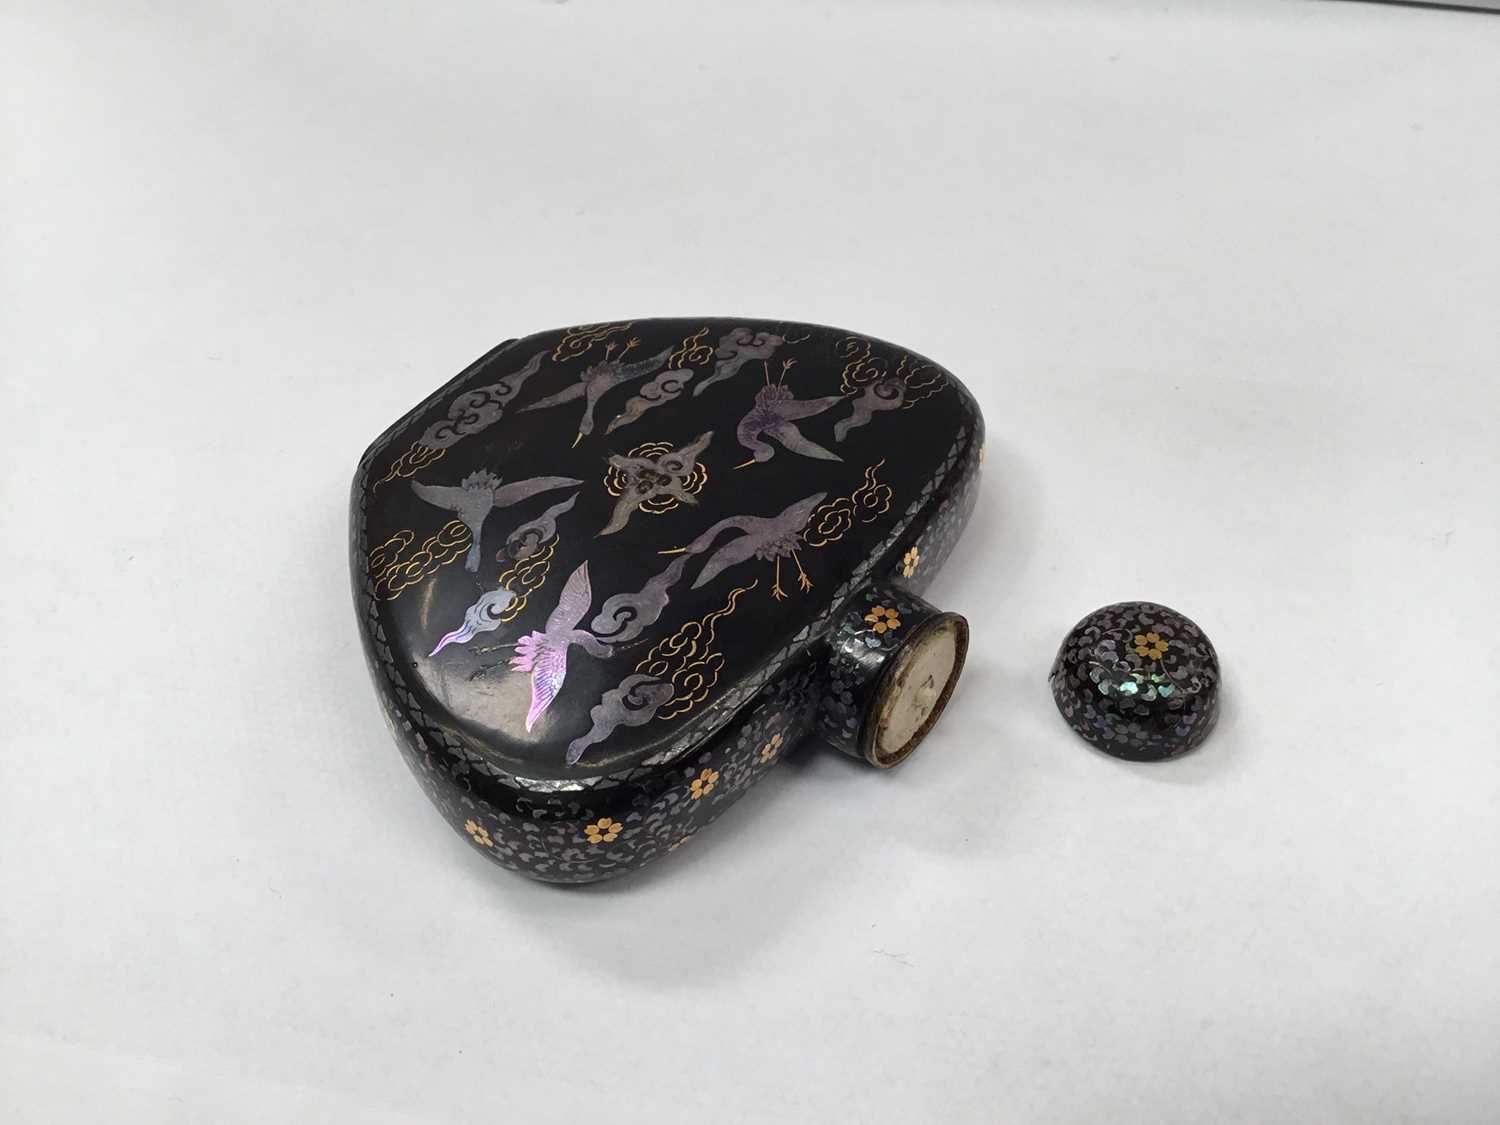 Japanese Meiji period lac burgaute metal inlaid heart shaped snuff bottle and stopper - Image 7 of 7